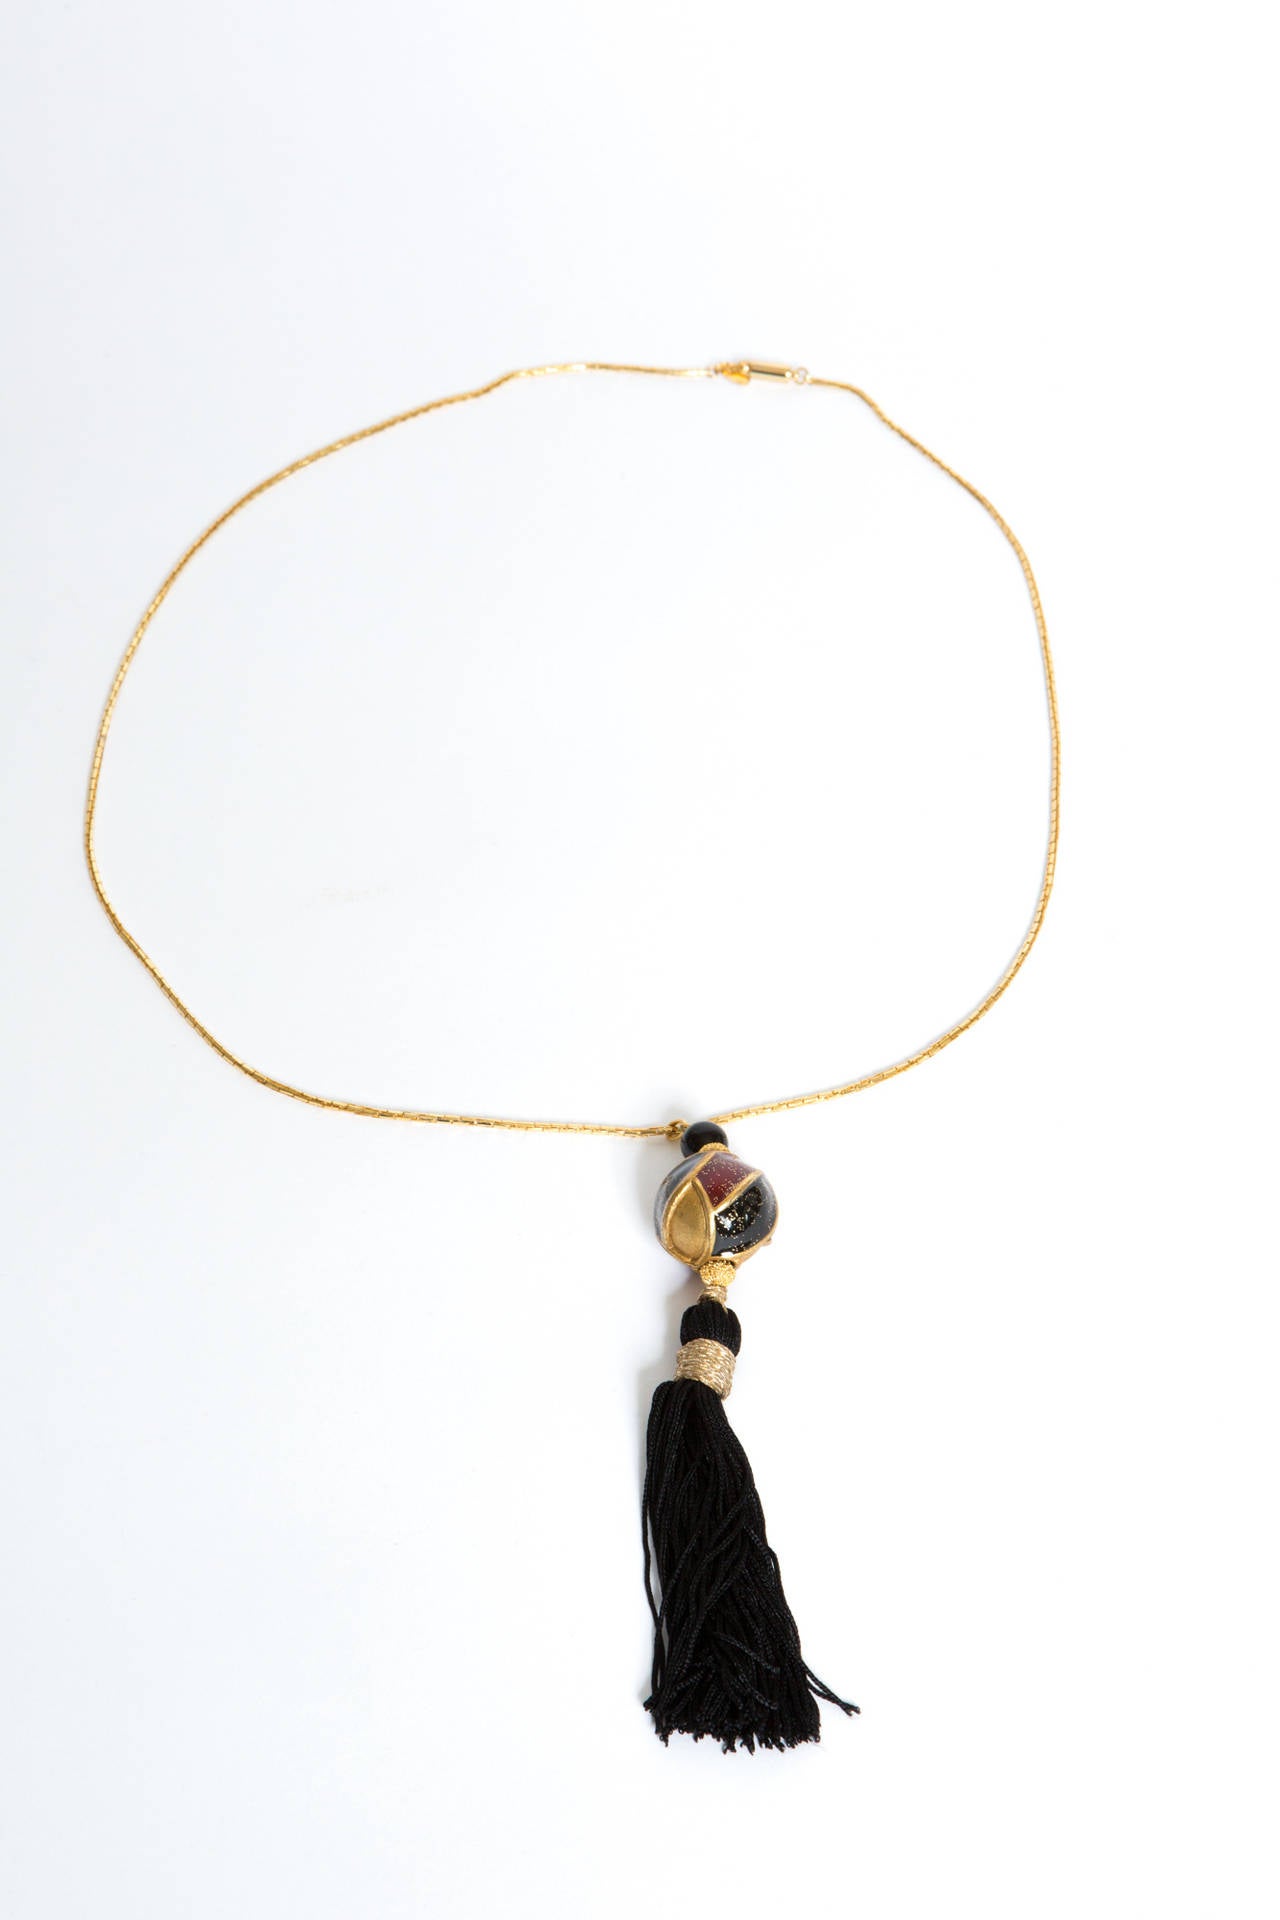 1970s Ungaro pendant necklace featuring a gold tone link chain (total lenght 78cm) and a fancy colorfull bead with a silk tassel hanging at the end (Total length bead + tassel (15cm), this necklace is marked on a plaque.